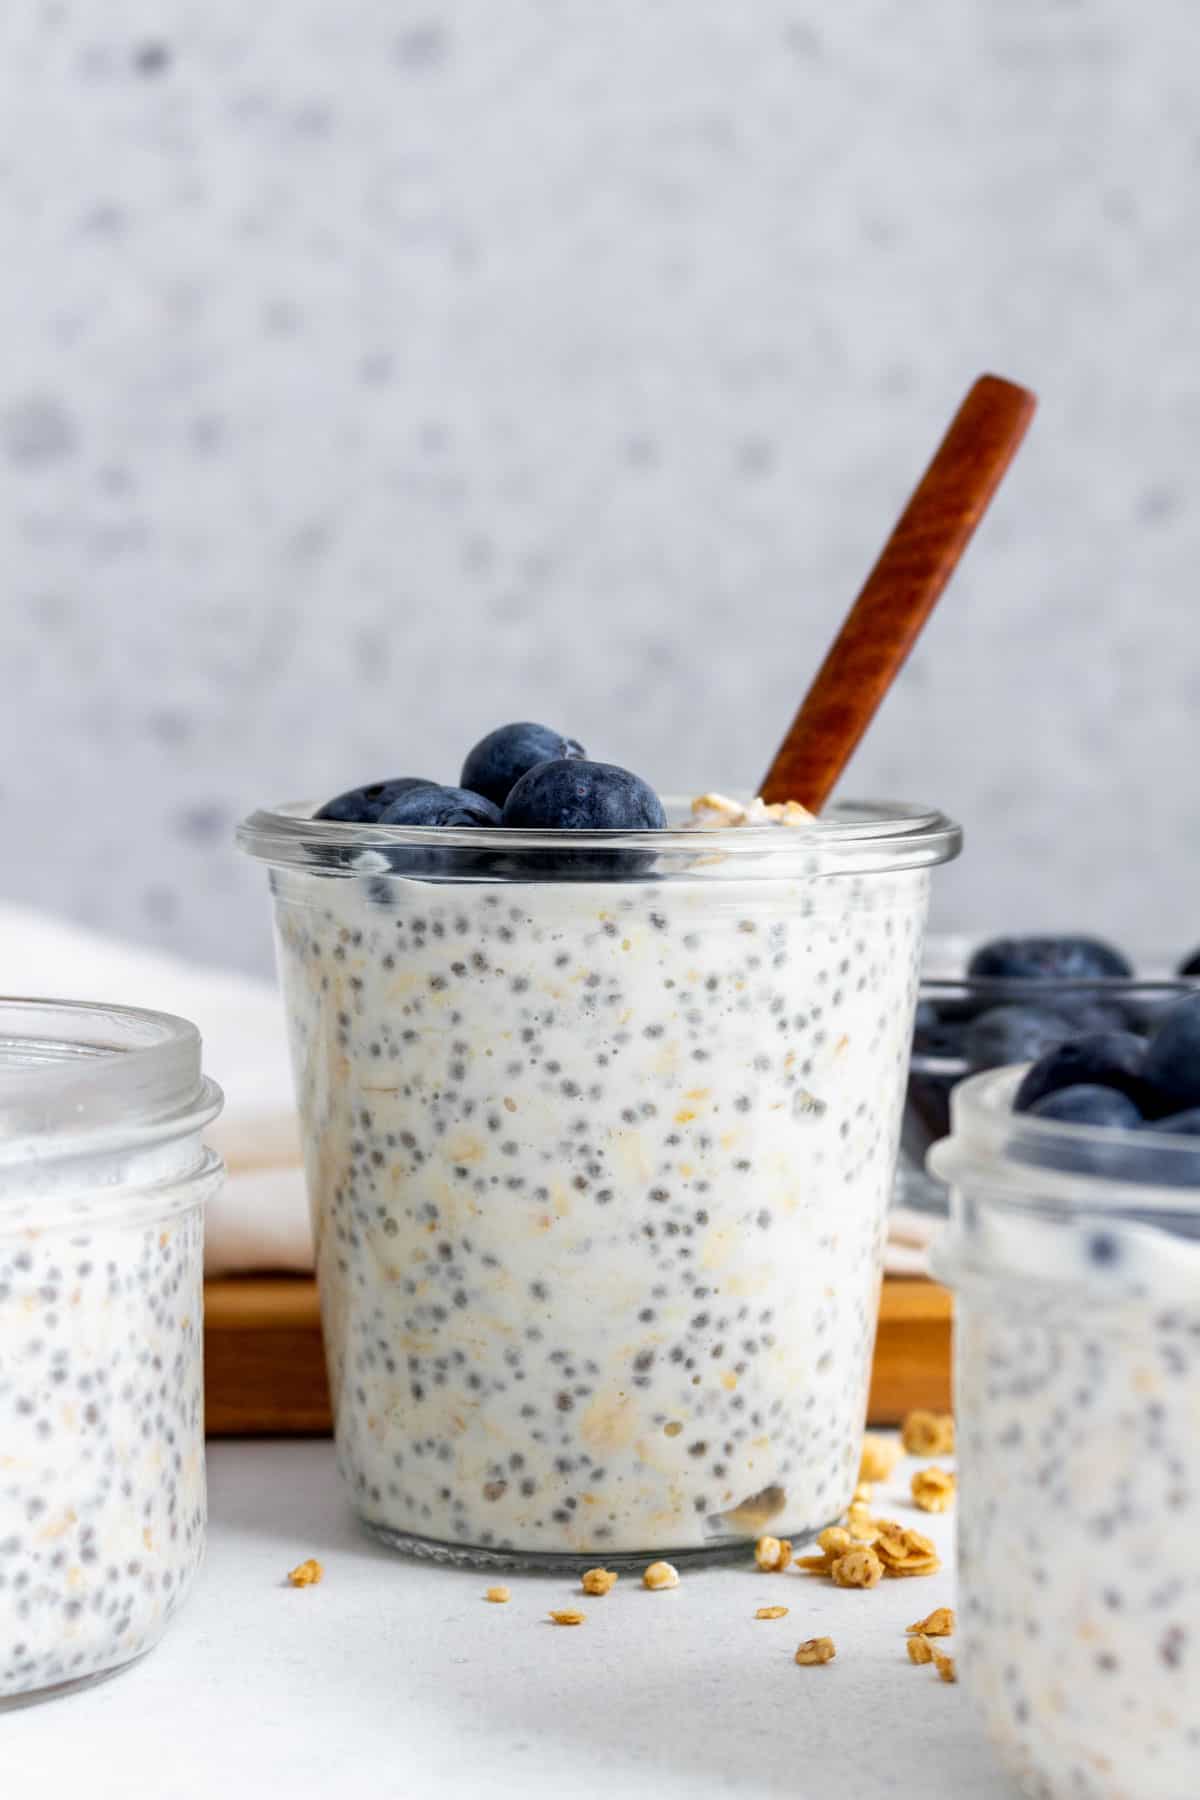 A jar of vanilla overnight oats with blueberries on top and a spoon inserted.